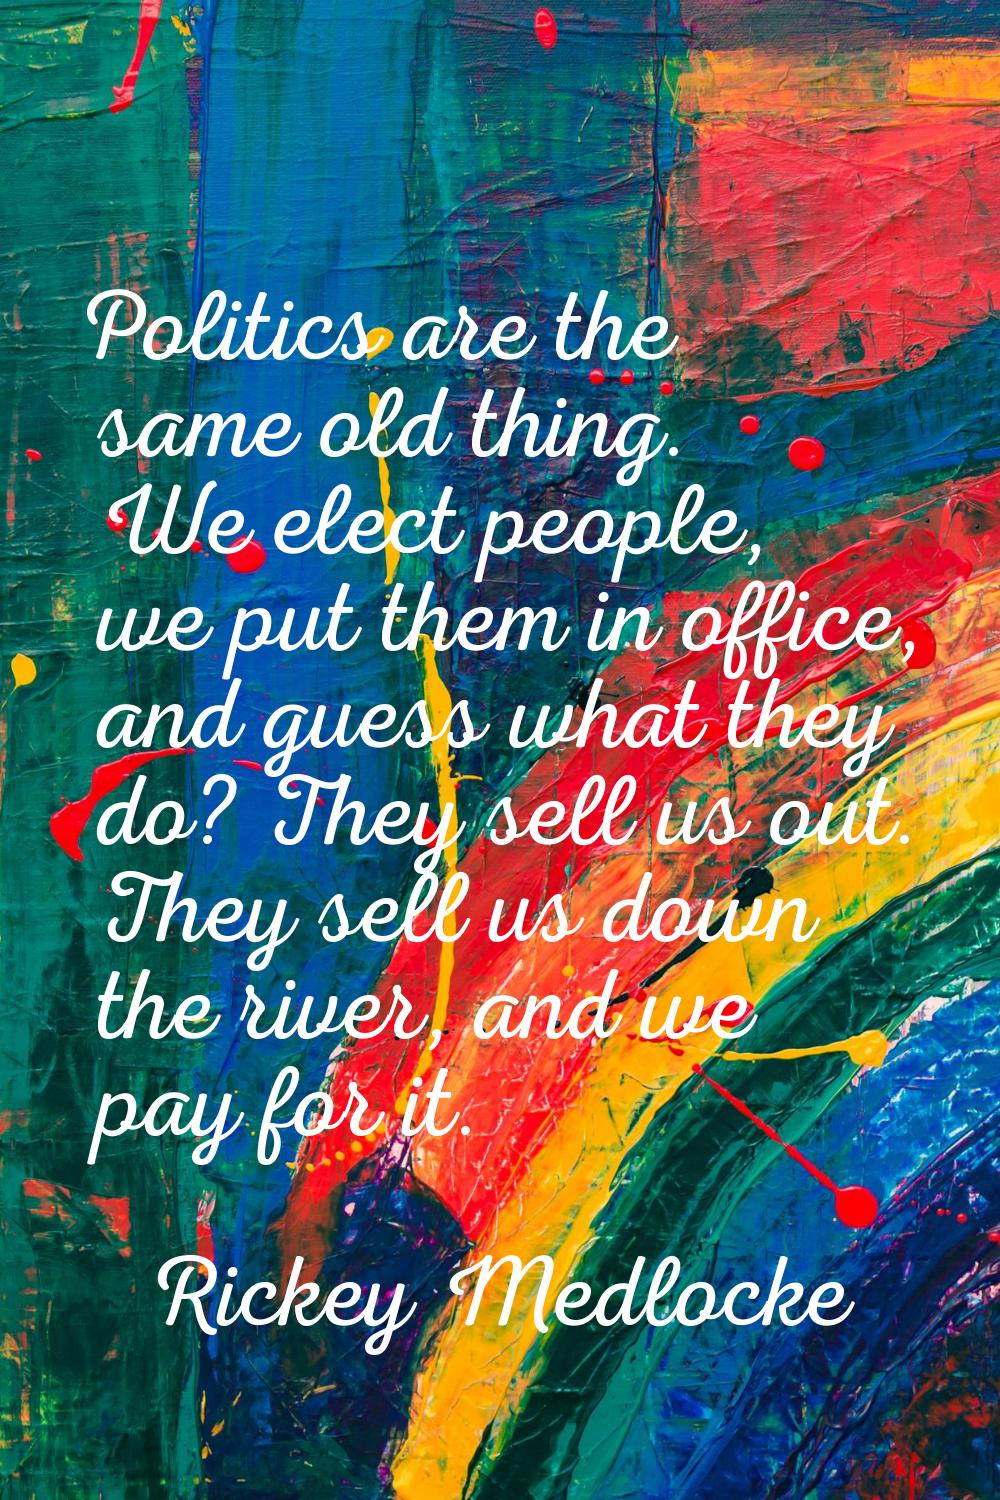 Politics are the same old thing. We elect people, we put them in office, and guess what they do? Th